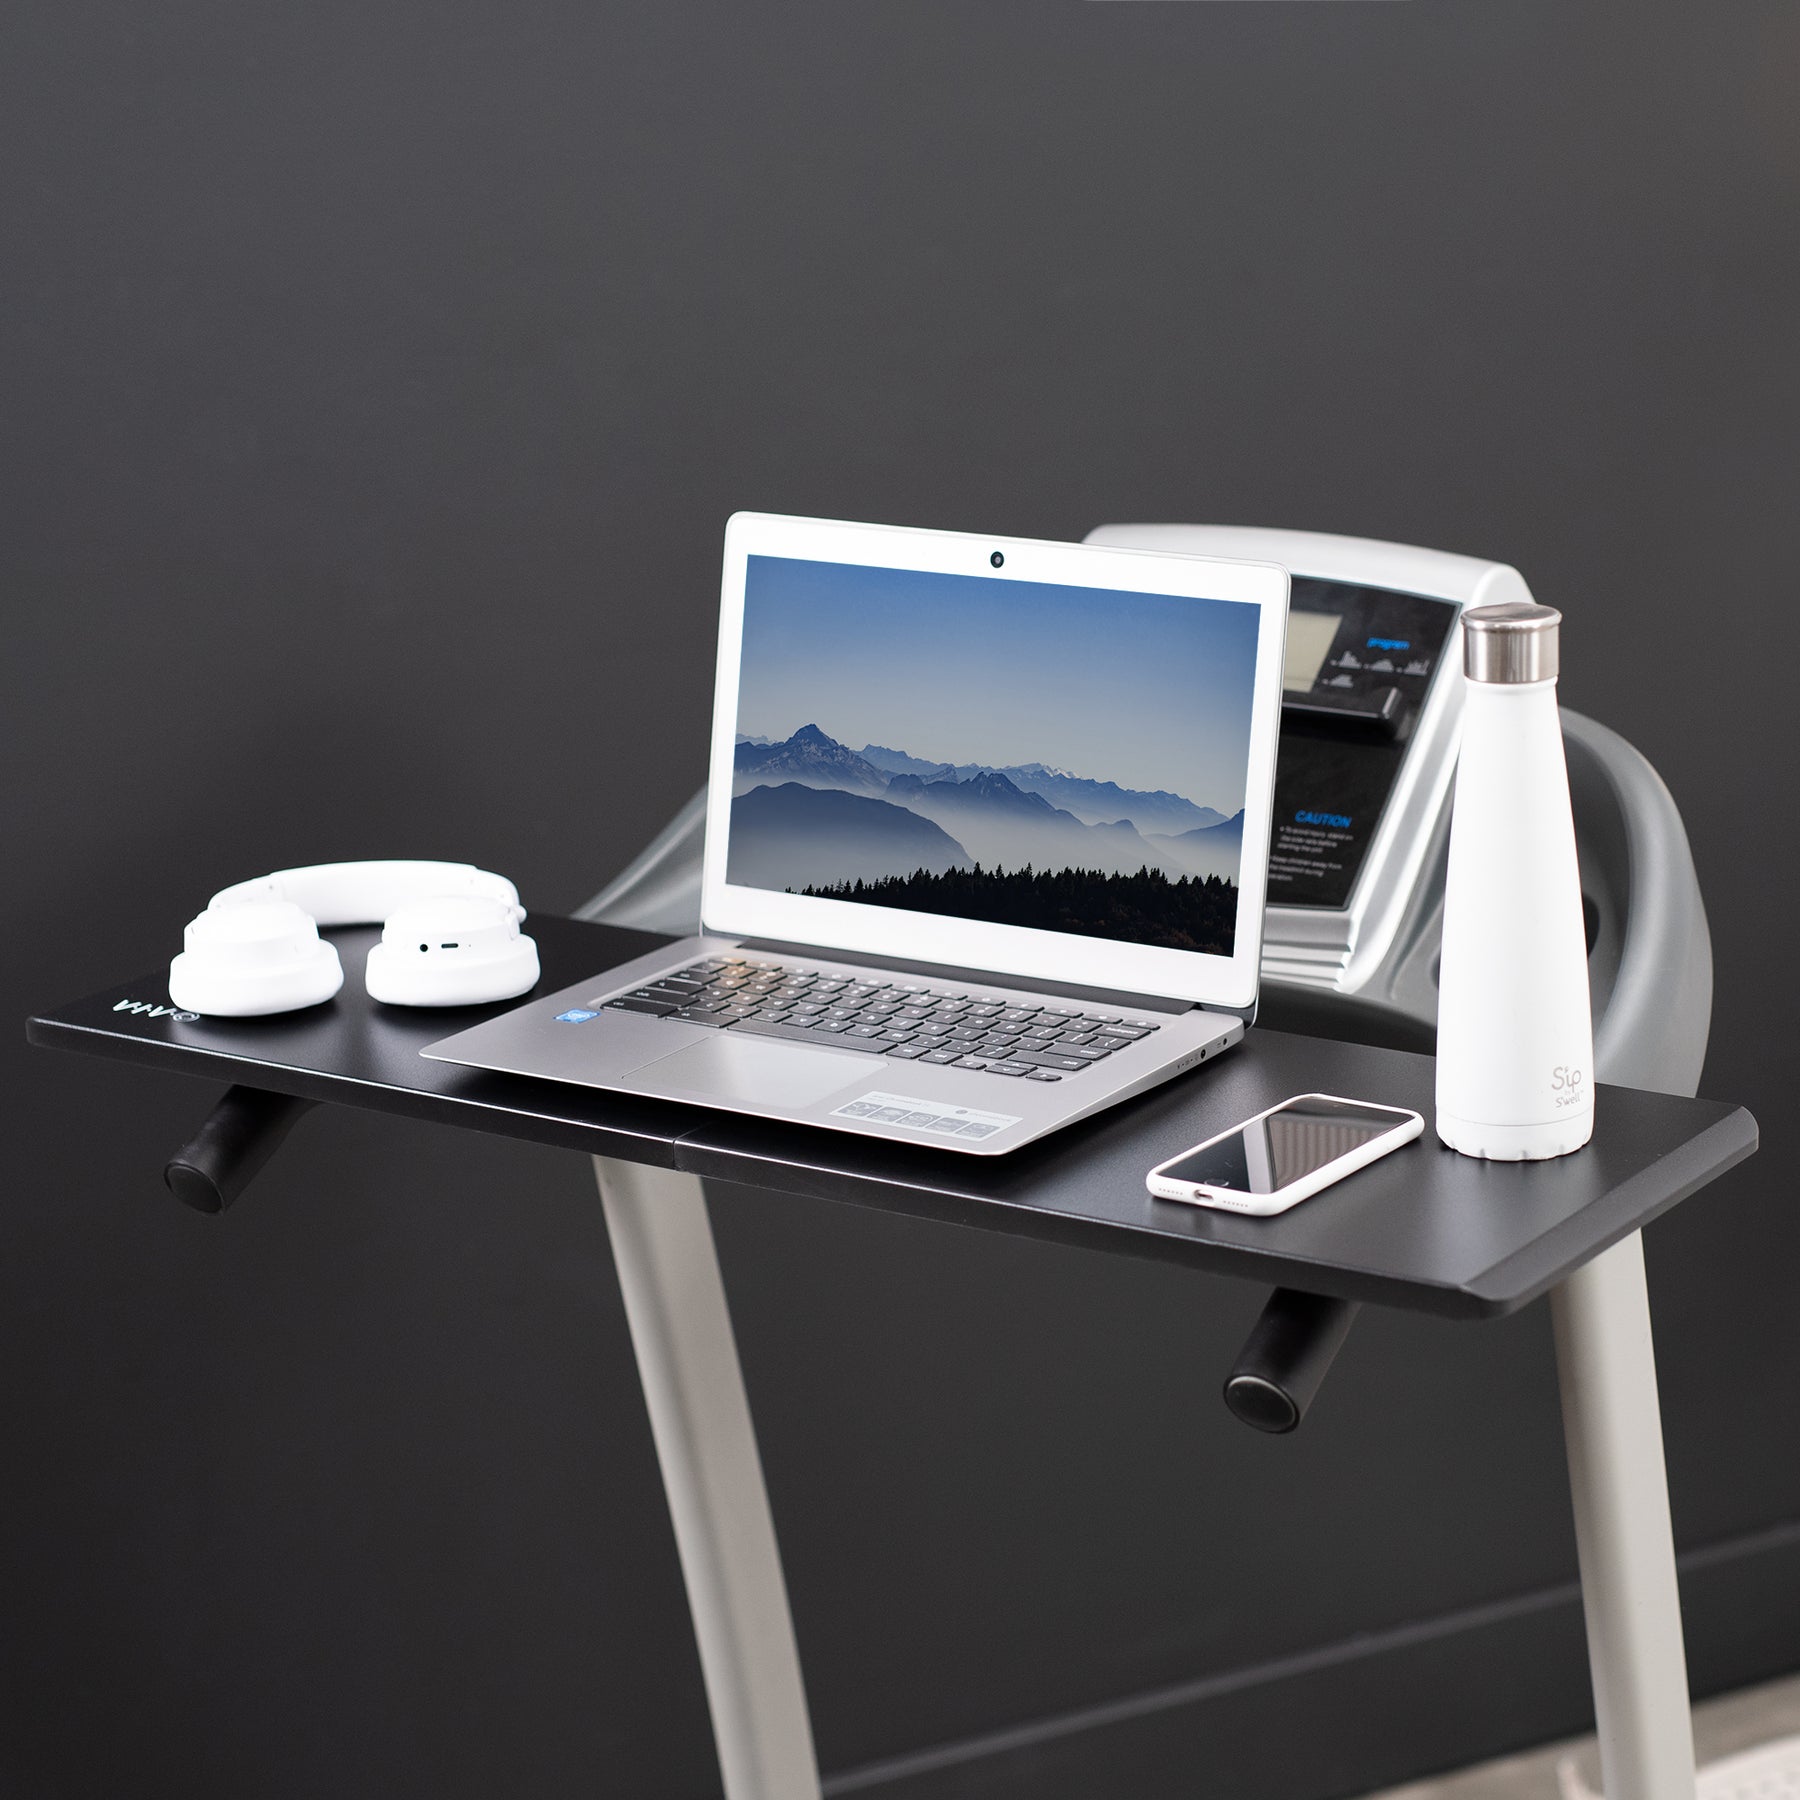 TV Stand for Treadmills & Ellipticals – VIVO - desk solutions, screen  mounting, and more